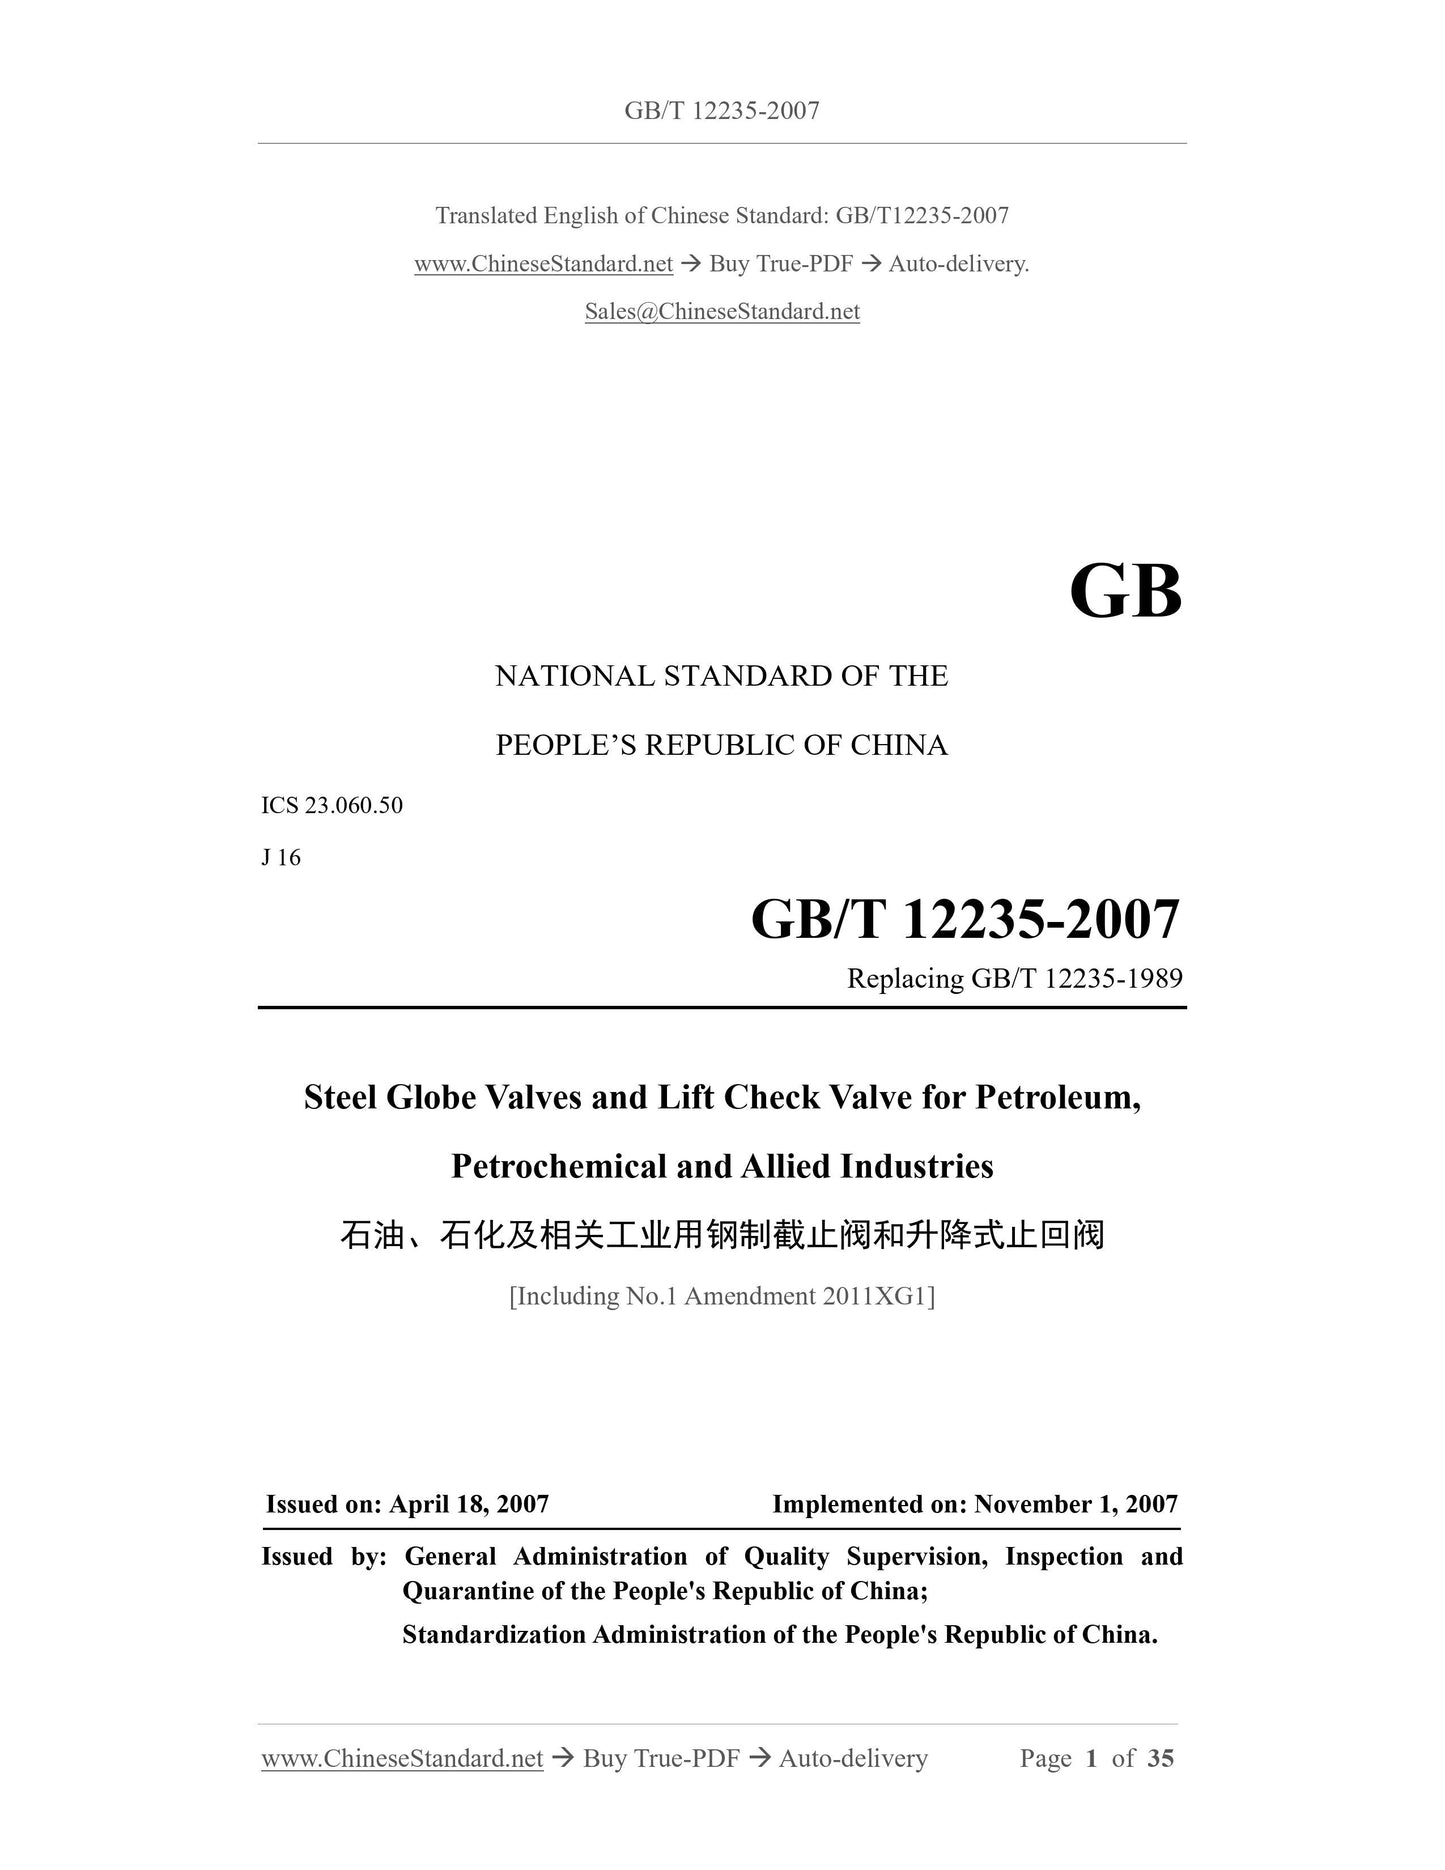 GB/T 12235-2007 Page 1